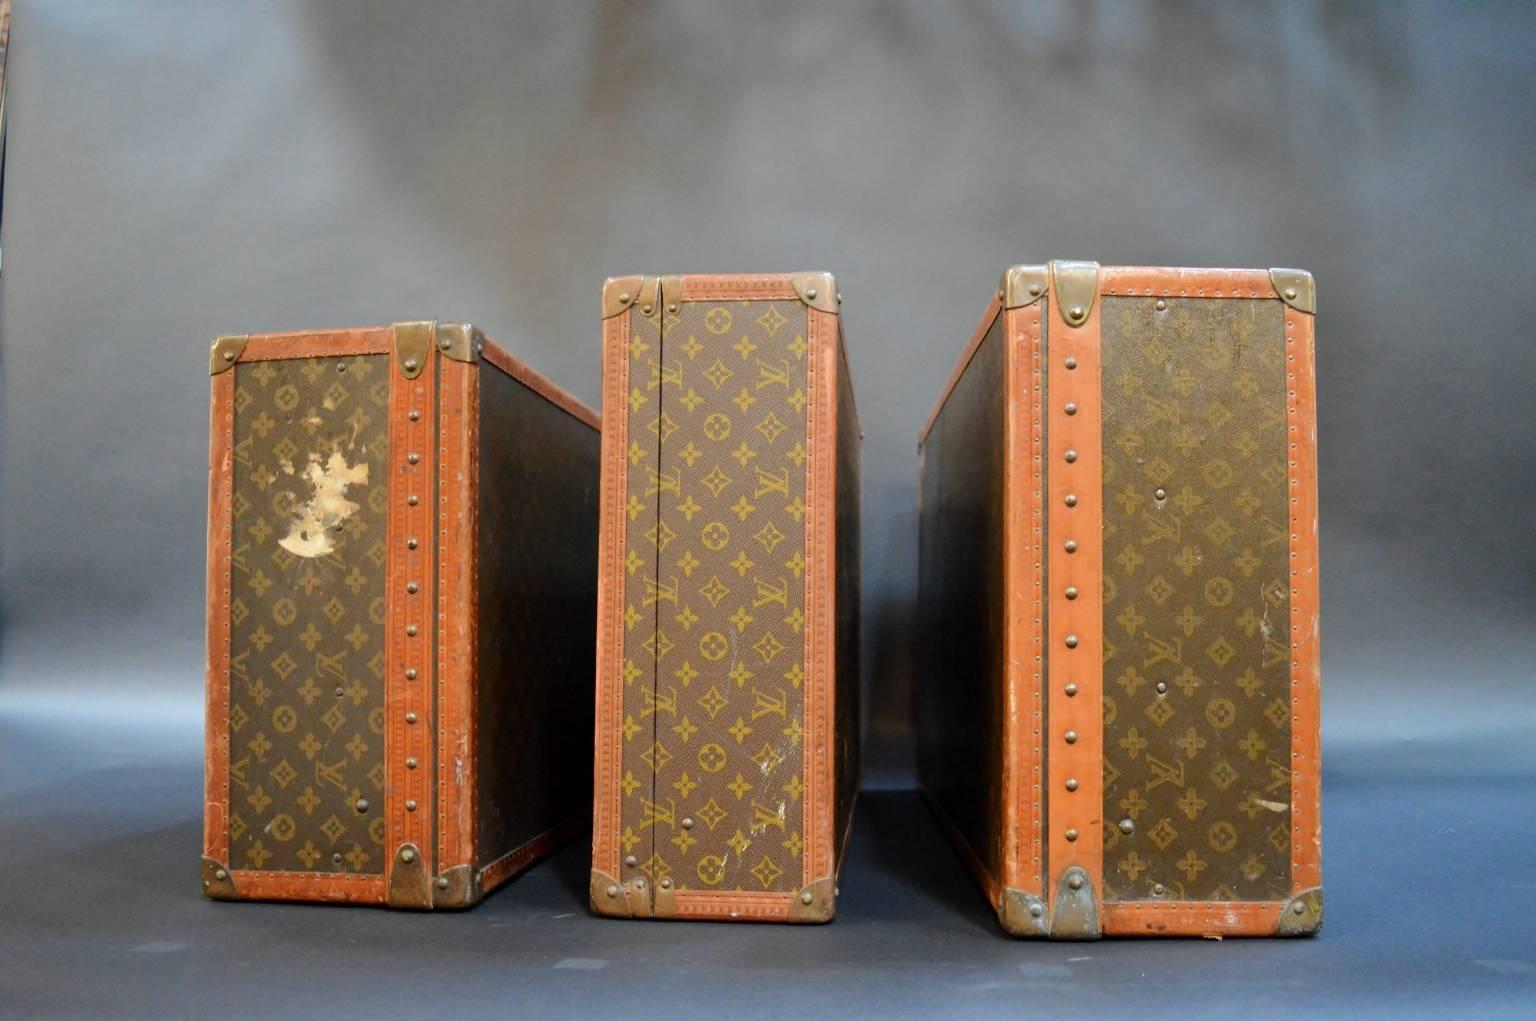 Set of three vintage Louis Vuitton suitcases. Original hardware and lining to the pieces. Stamped with original owner's initials.

Measure: Large size 30